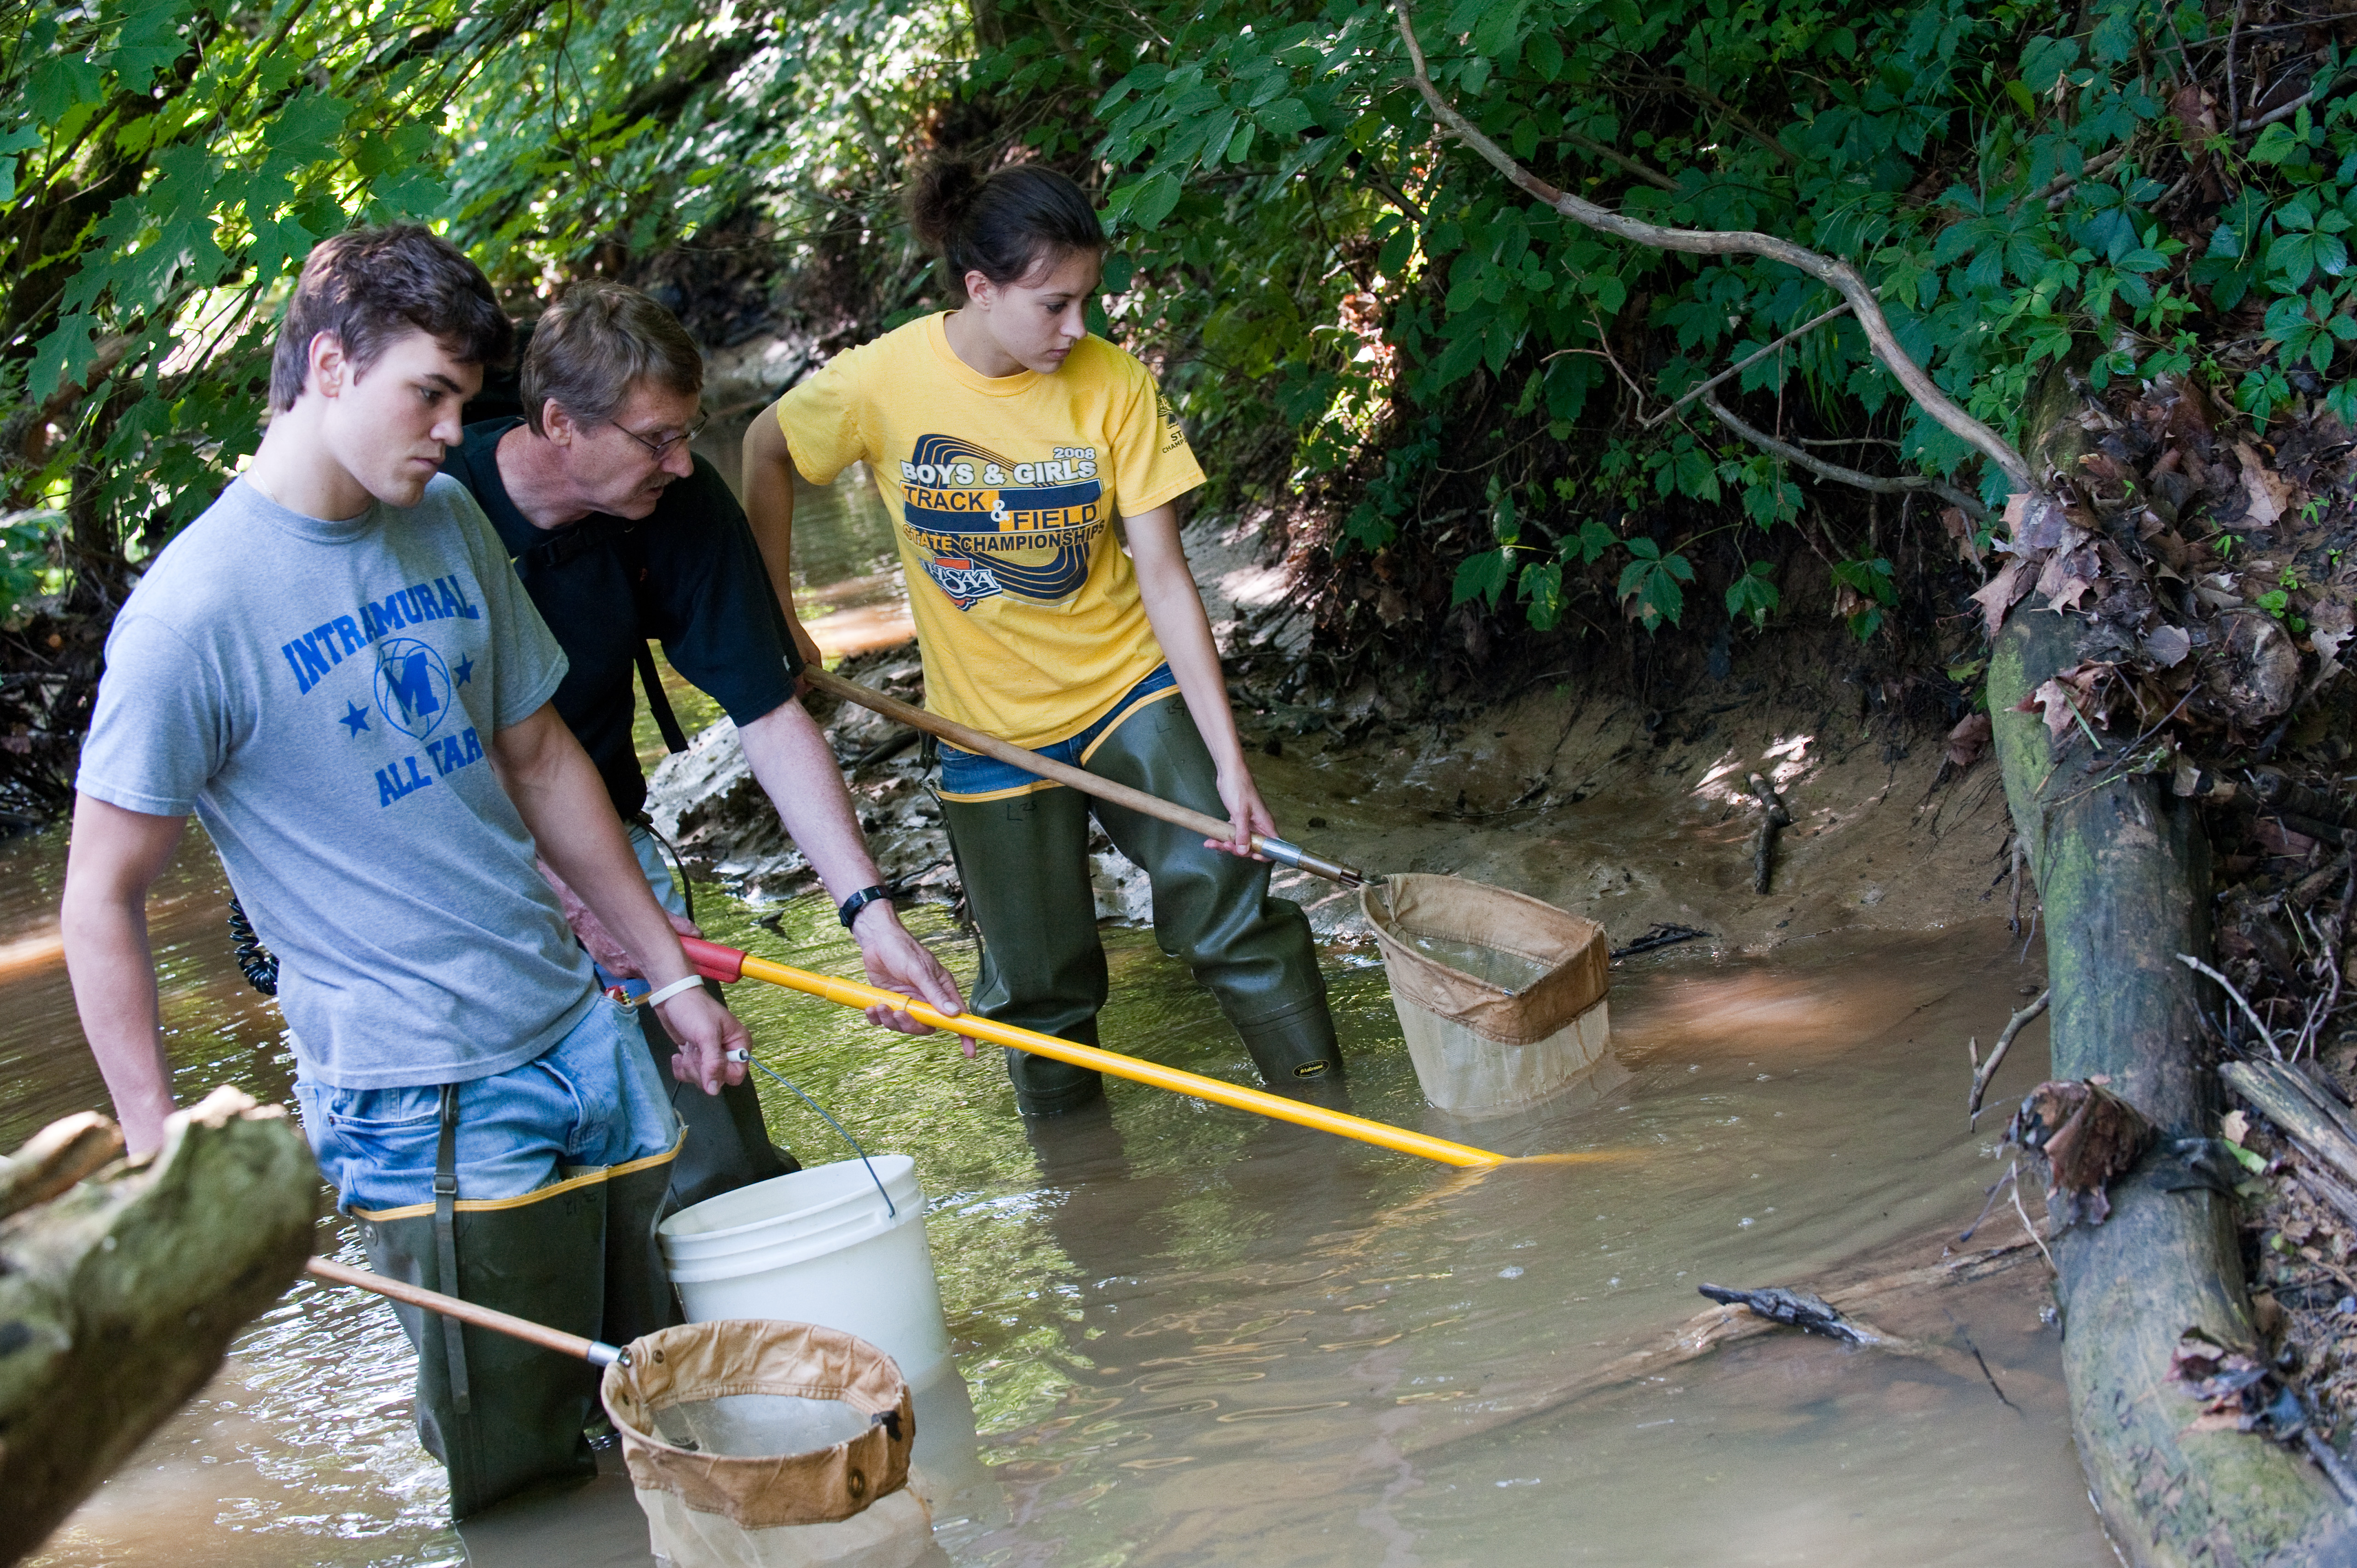 Students work with Dr. Bandoli to humanely collect Fish specimen